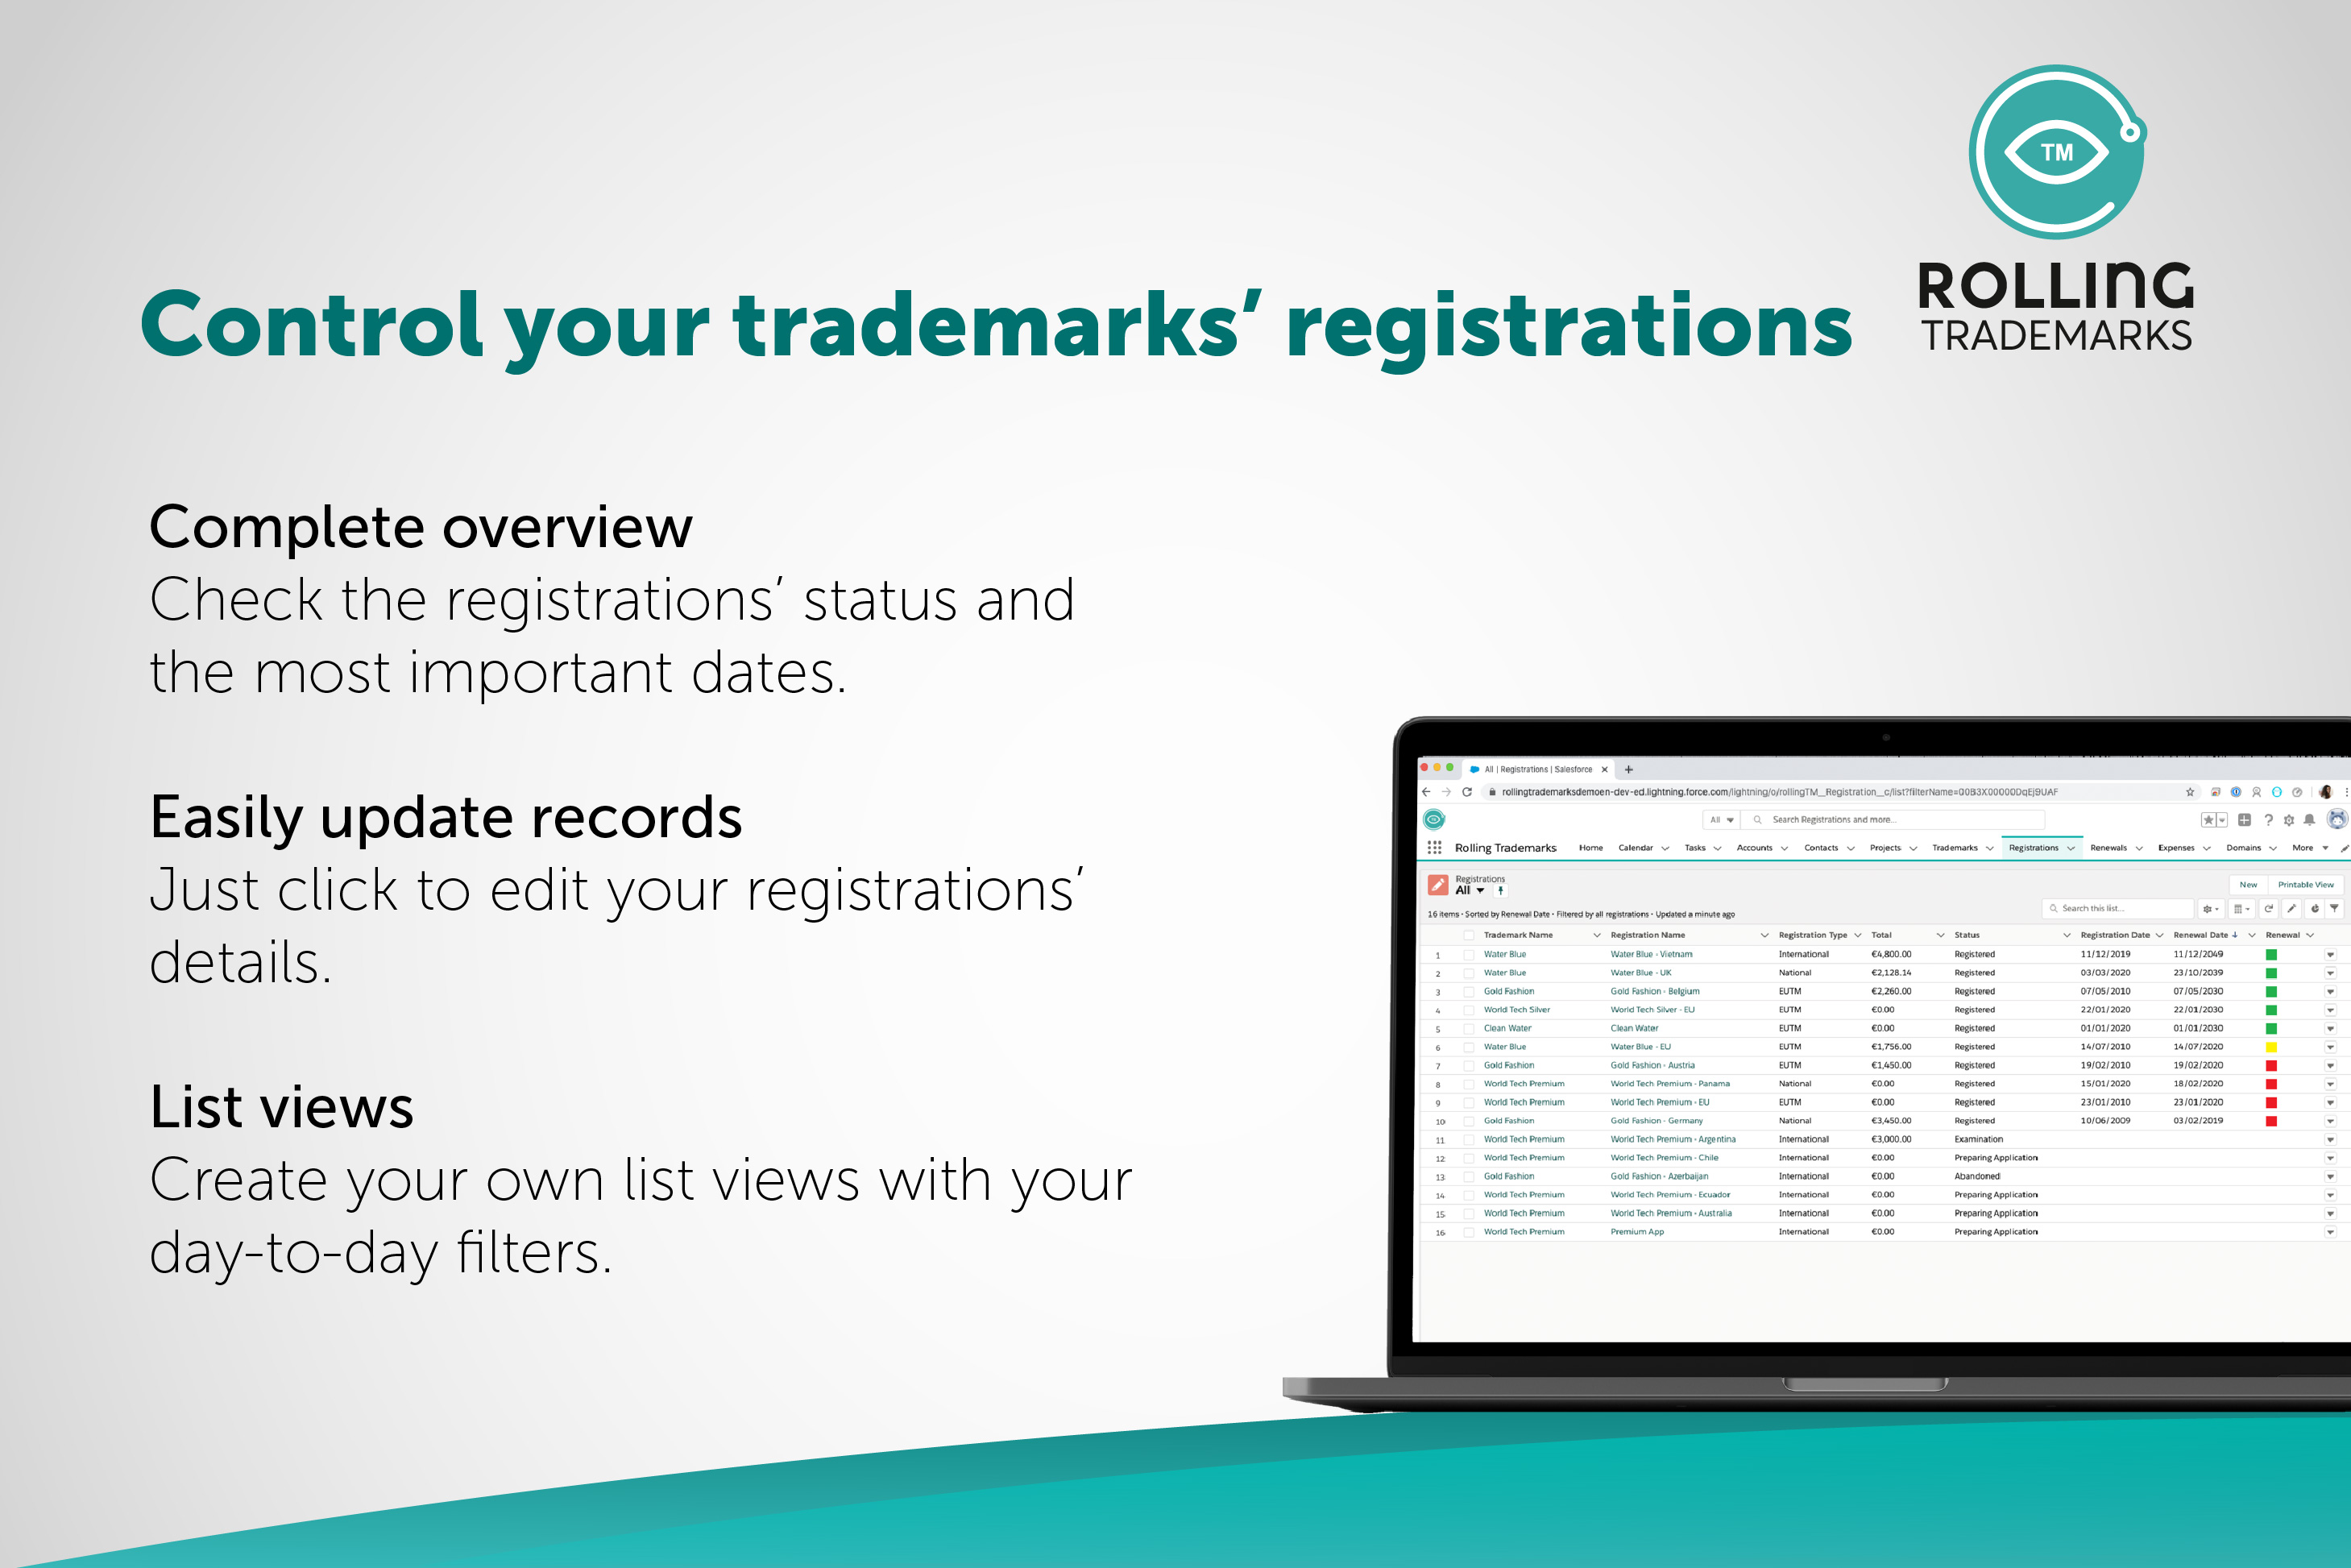 Rolling Trademarks: Control your trademarks registrations